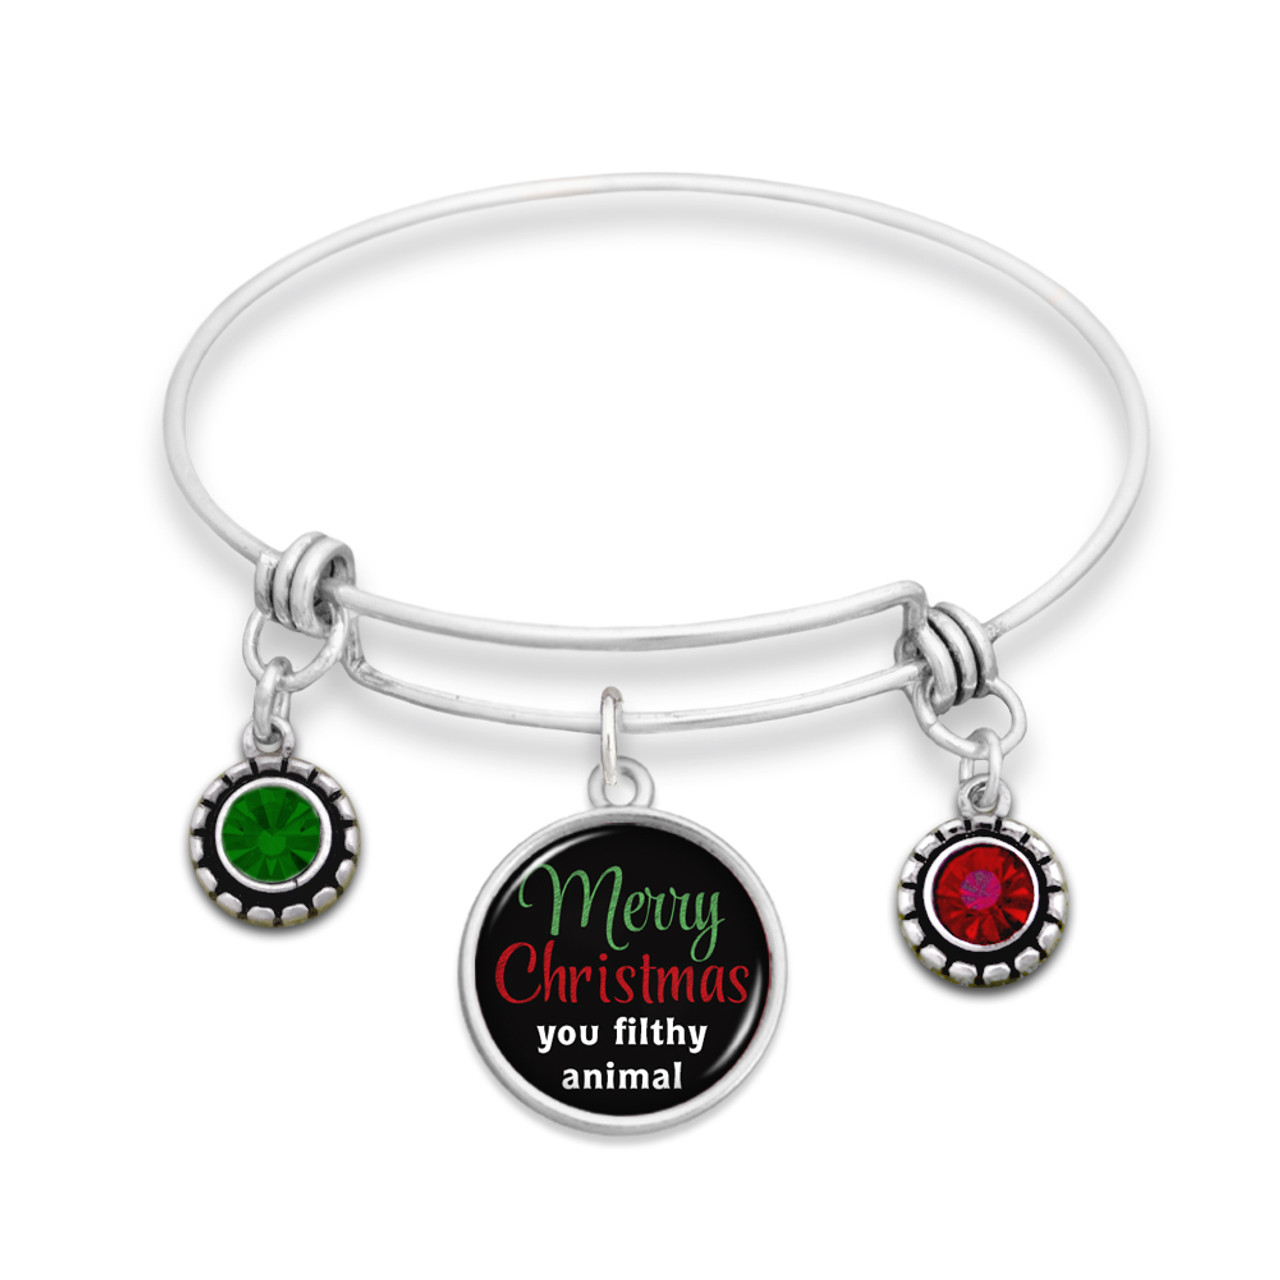 Believe Christmas Collection- Merry Christmas You Filthy Animal Wire Bangle Bracelet